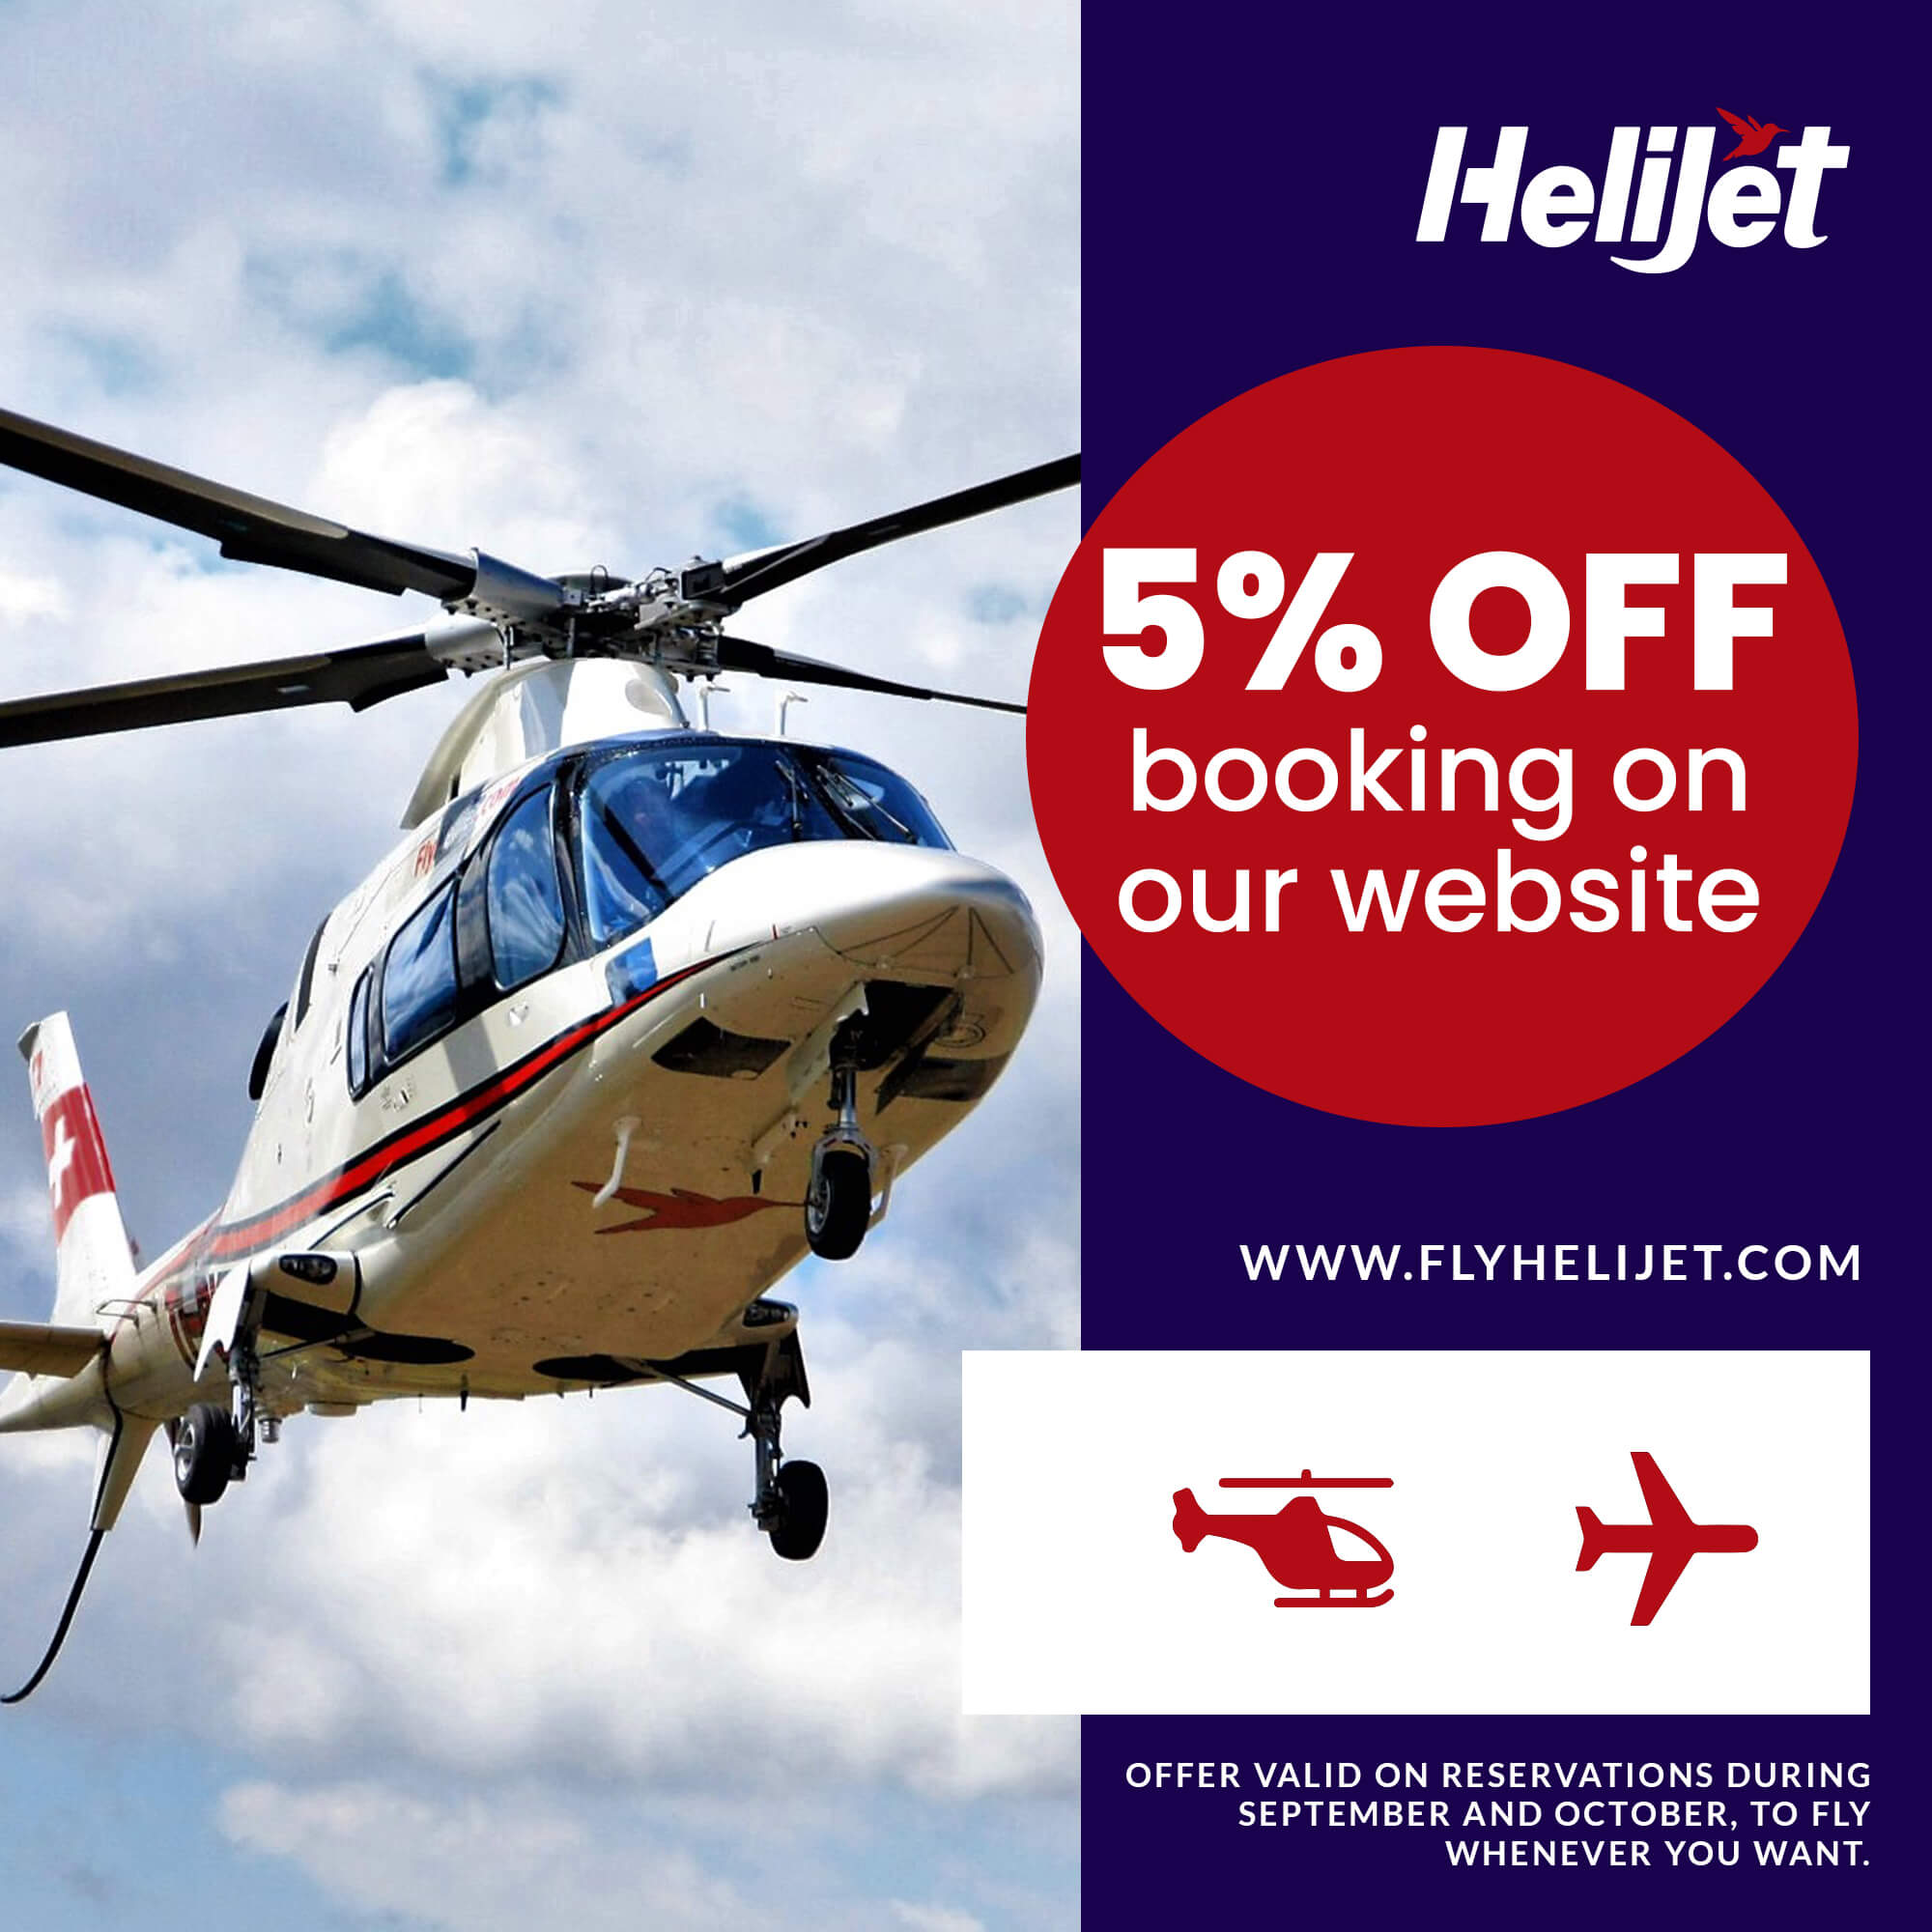 Helijet 5% Off Booking on our Website